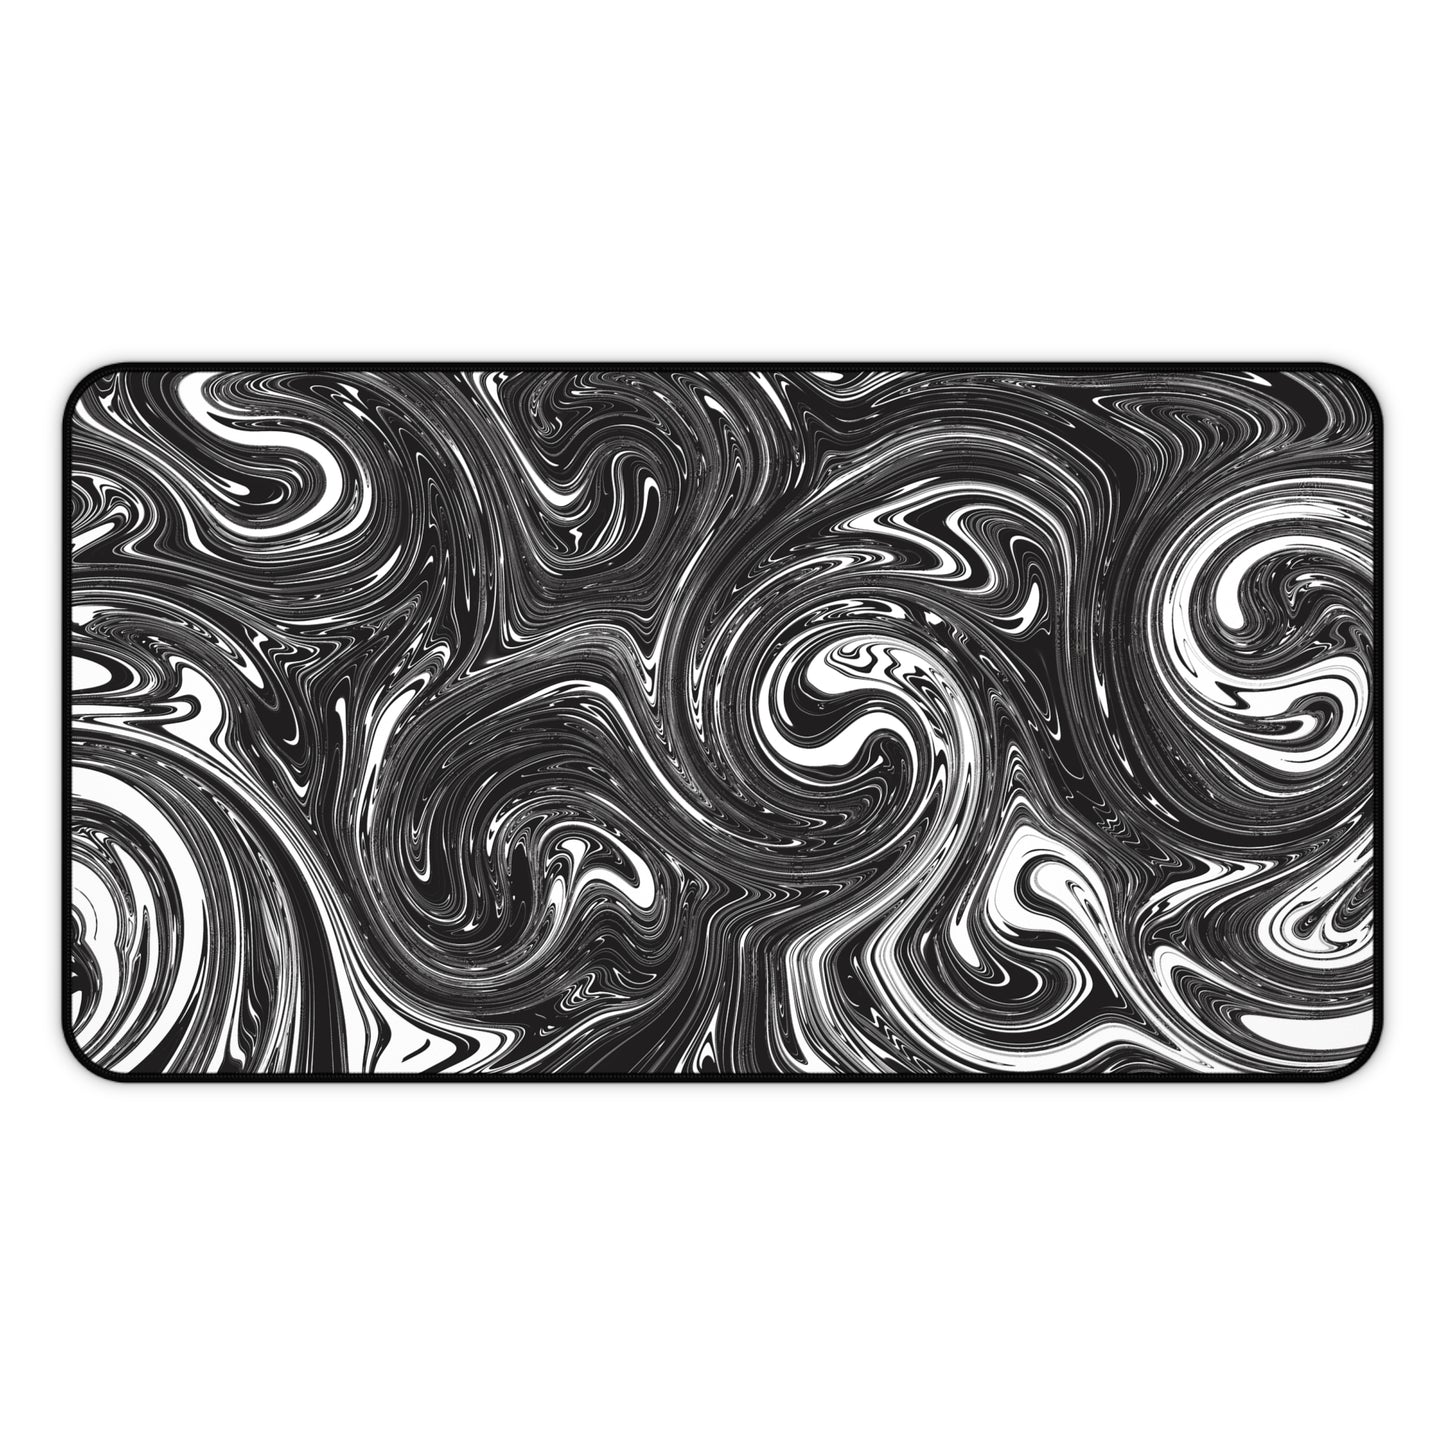 A 12" x 22" desk mat with black and white swirls.